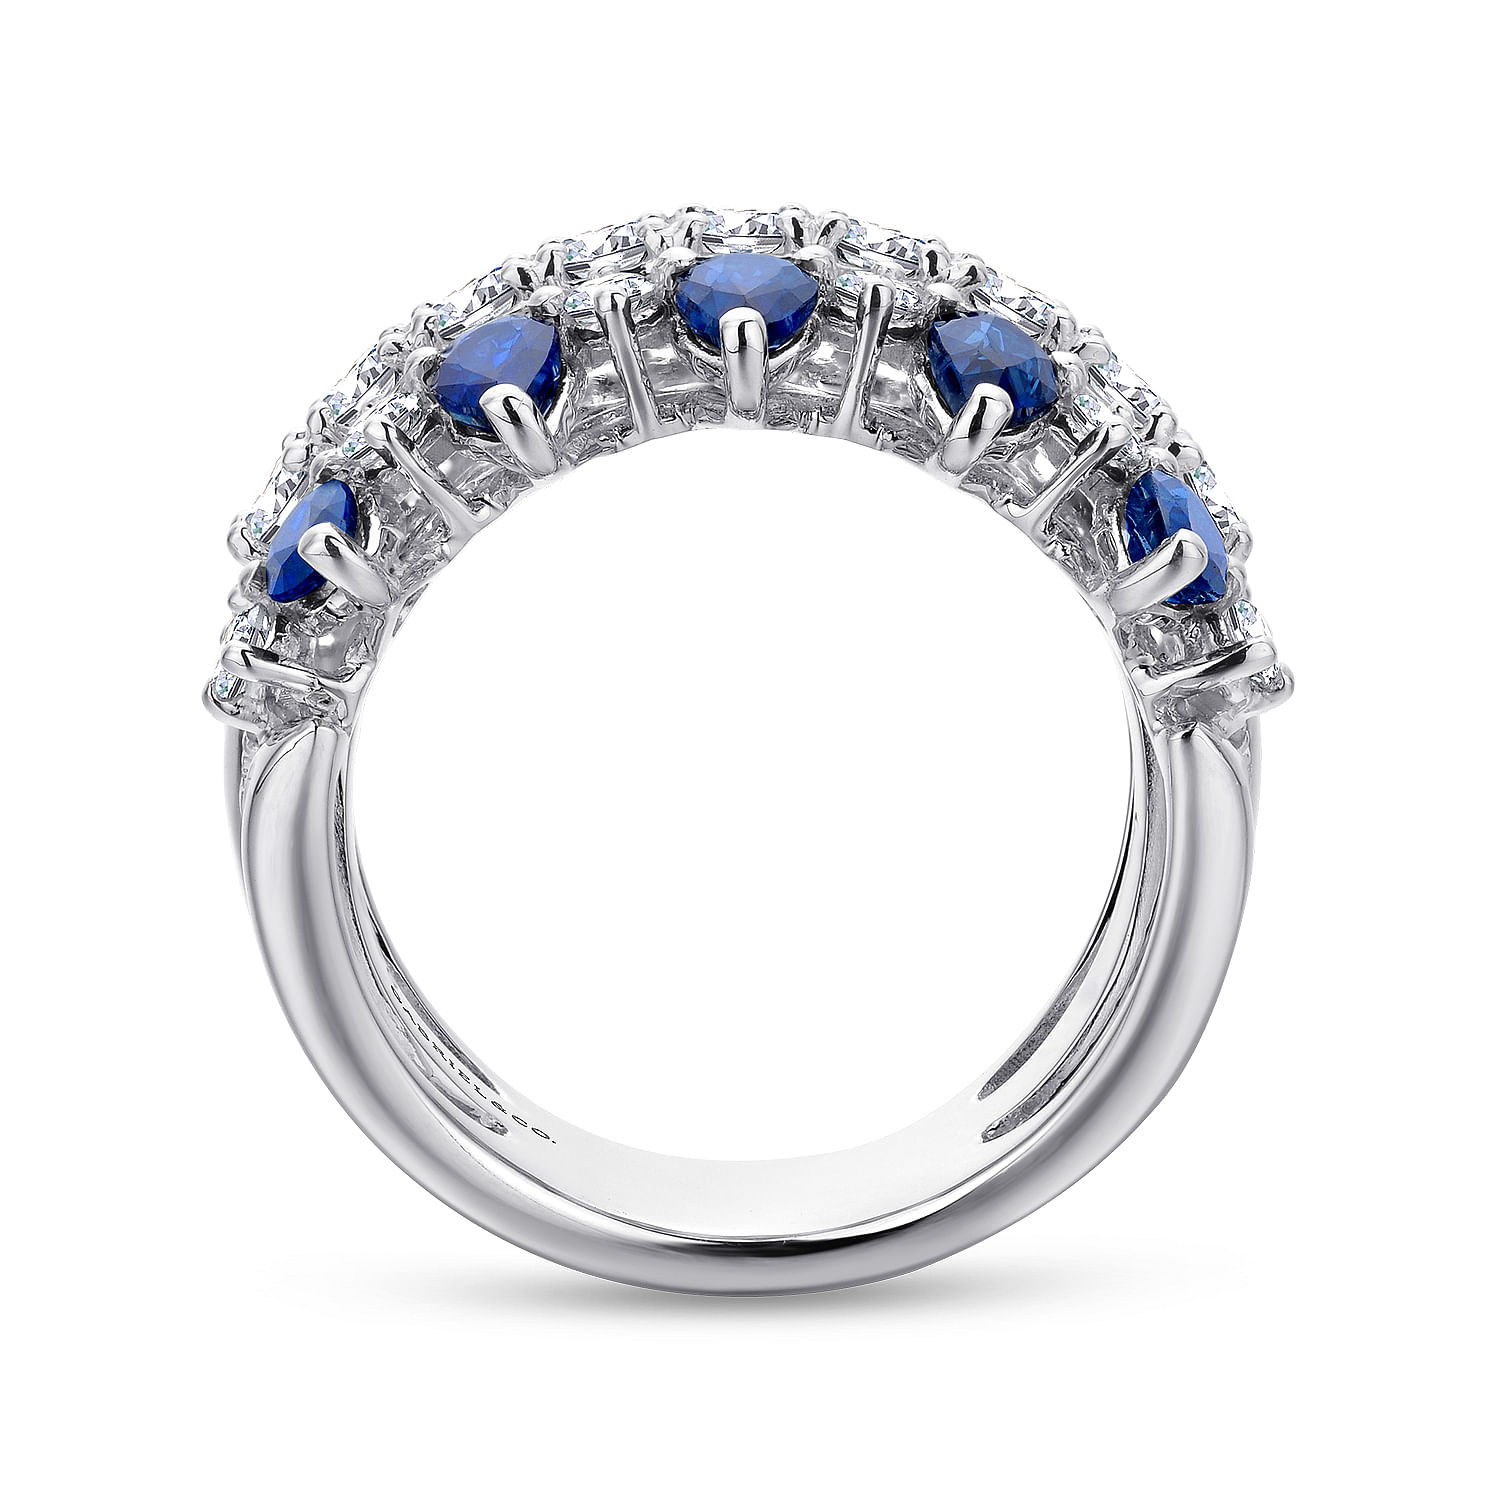 Wide 14K White Gold Round and Pear Shaped Diamond and Sapphire Anniversary Band